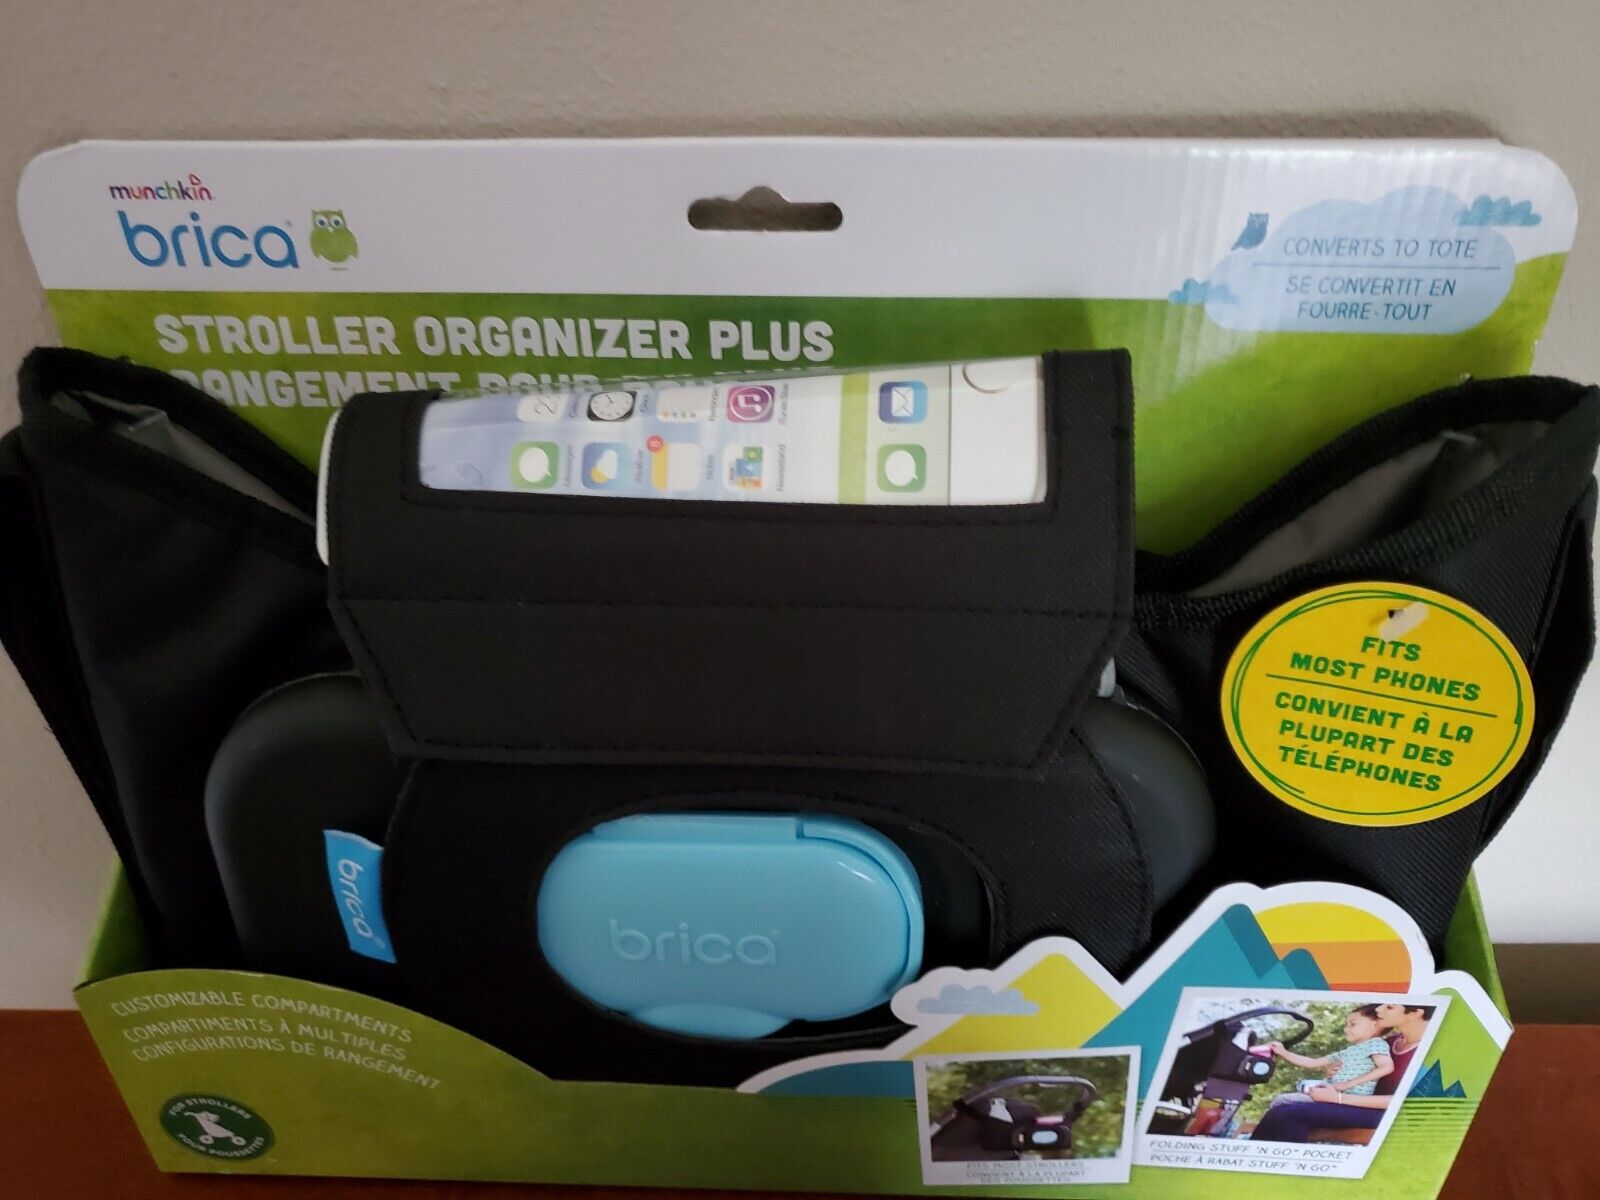 Brica Stroller Organizer Plus Customizable Compartments Tote Baby Gift Shower!!!